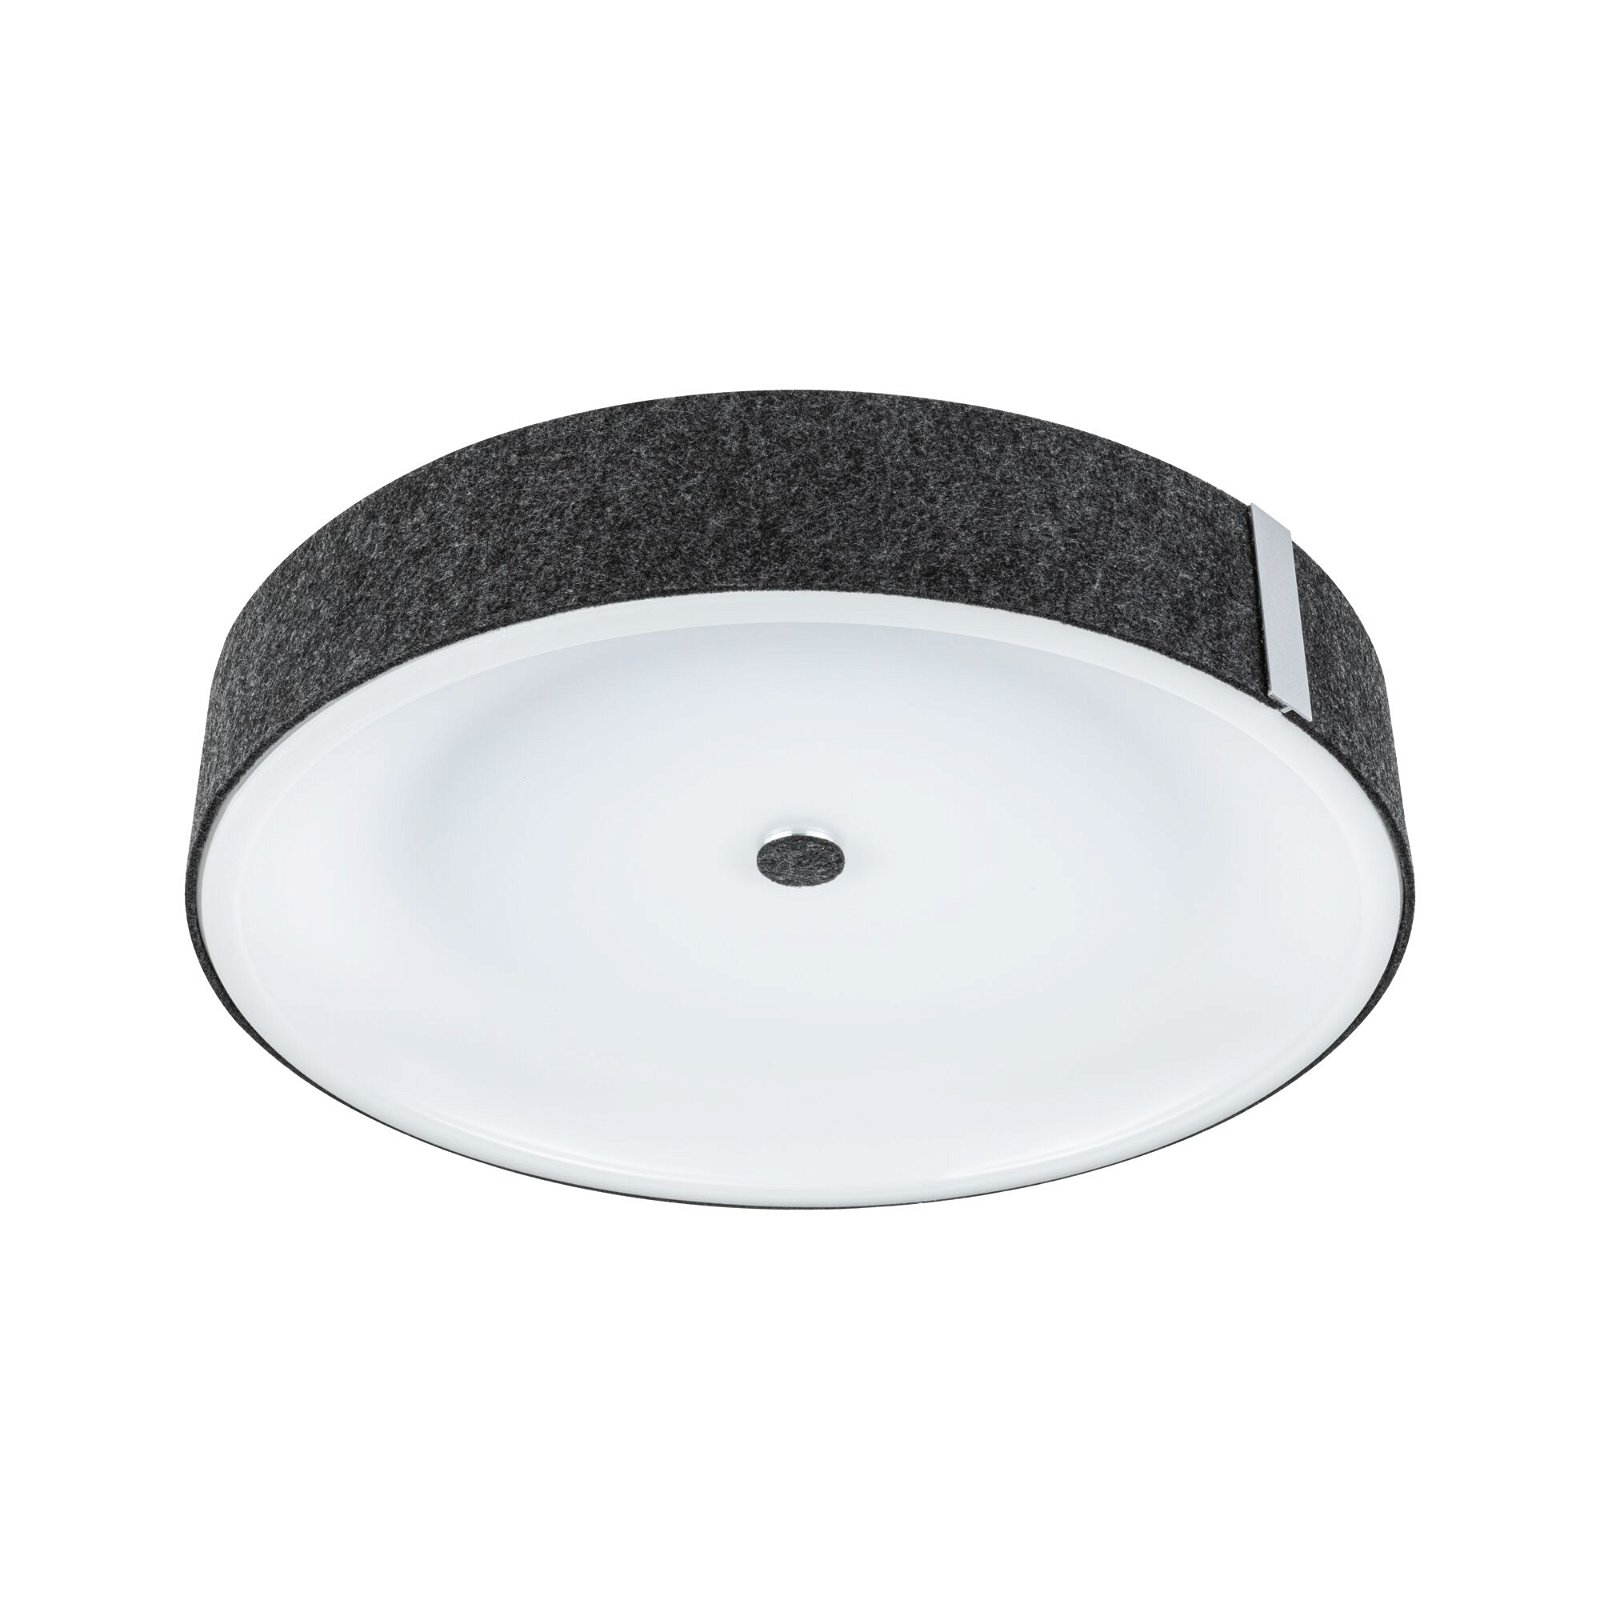 LED Ceiling luminaire 3-Step-Dim Malika 2700K 2300lm 230V 29W dimmable Anthracite